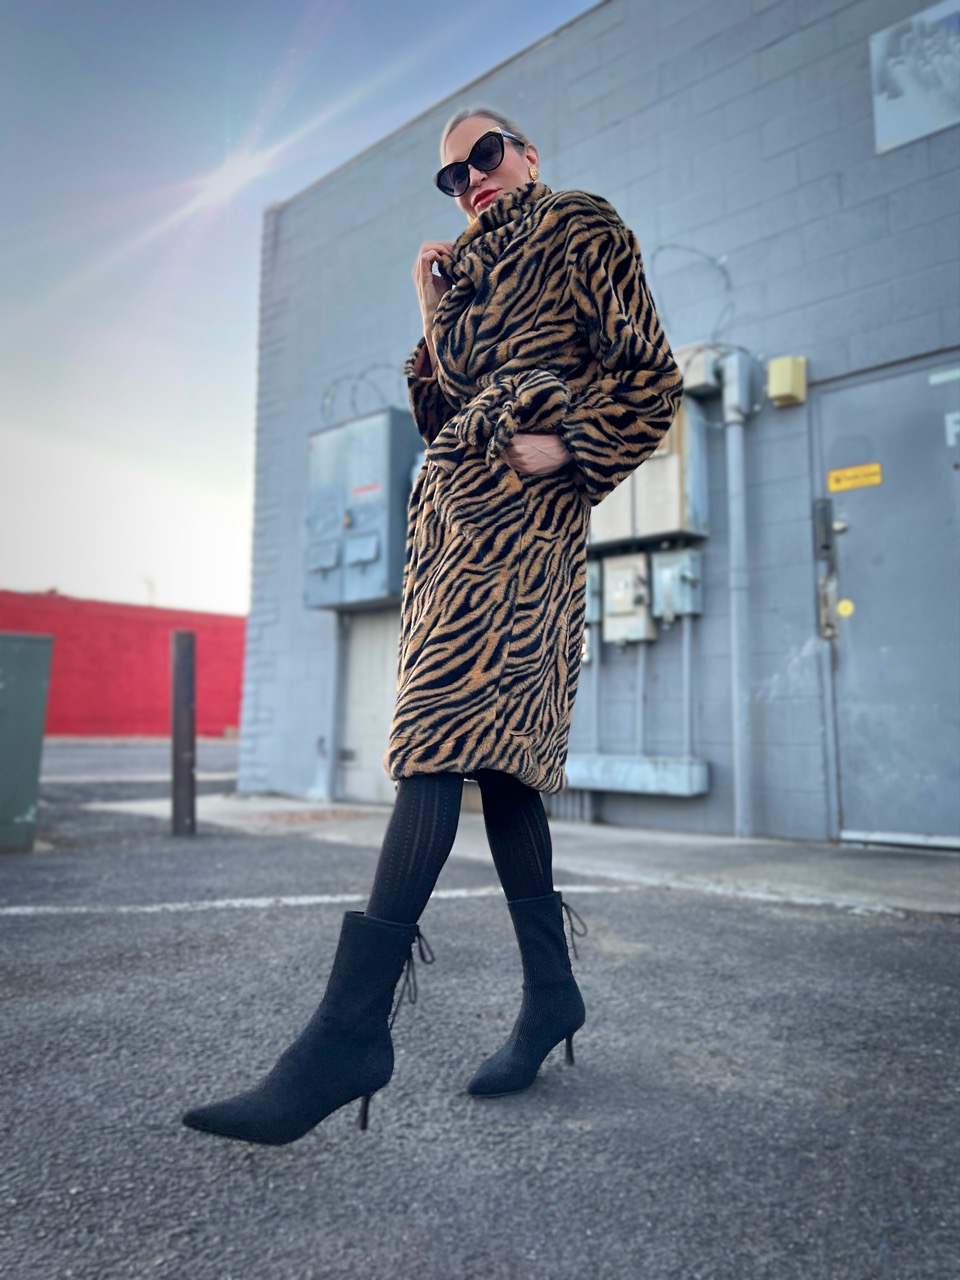 Lifestyle Influencer, Jamie Lewinger of More Than Turquoise, wearing Tiger print faux fur coat from SheIn